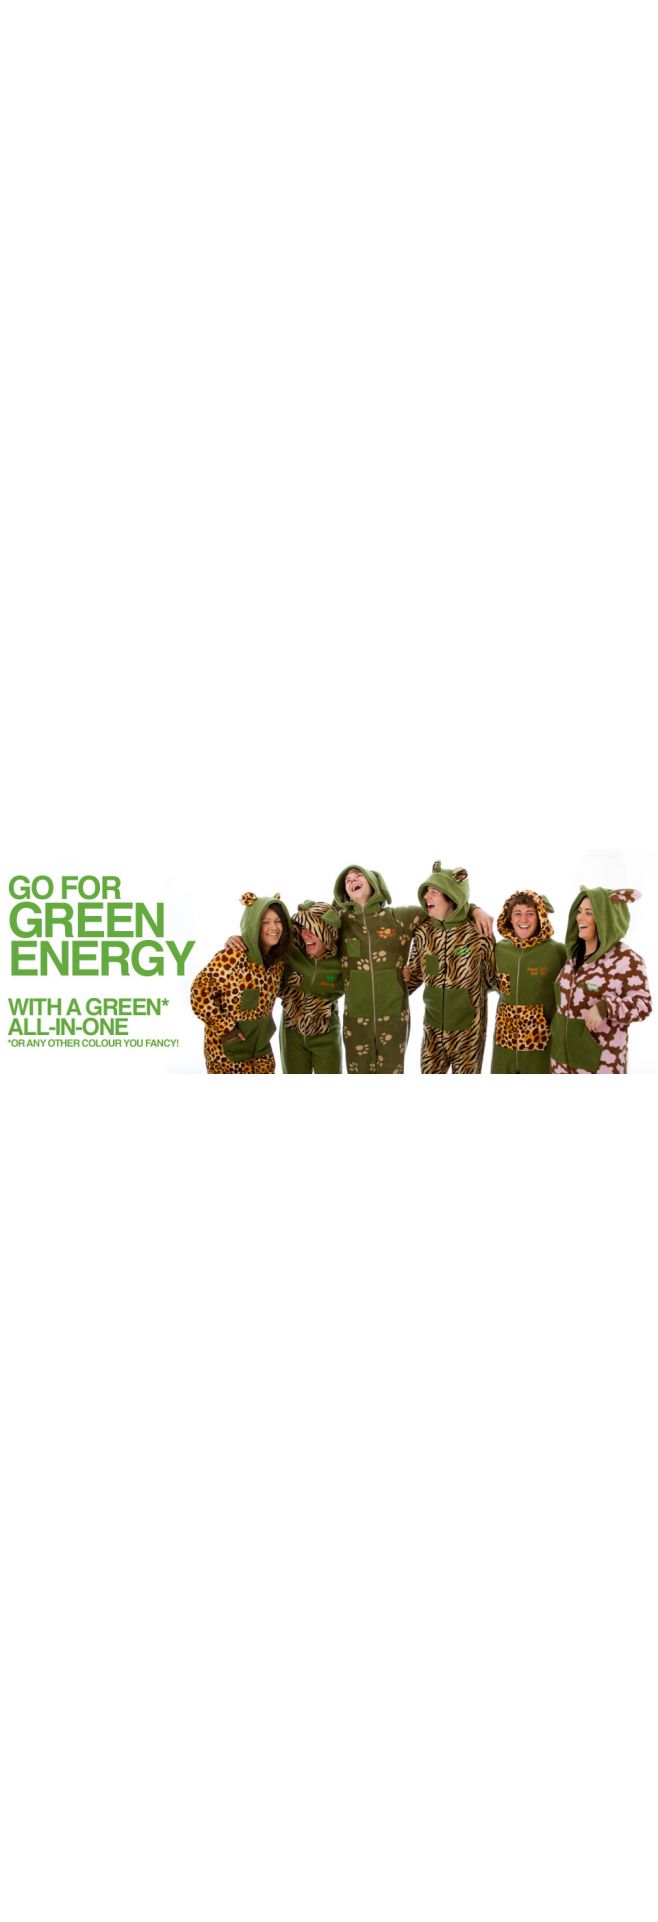 Go Green and Save Energy with an The All-in-One Company Onesie